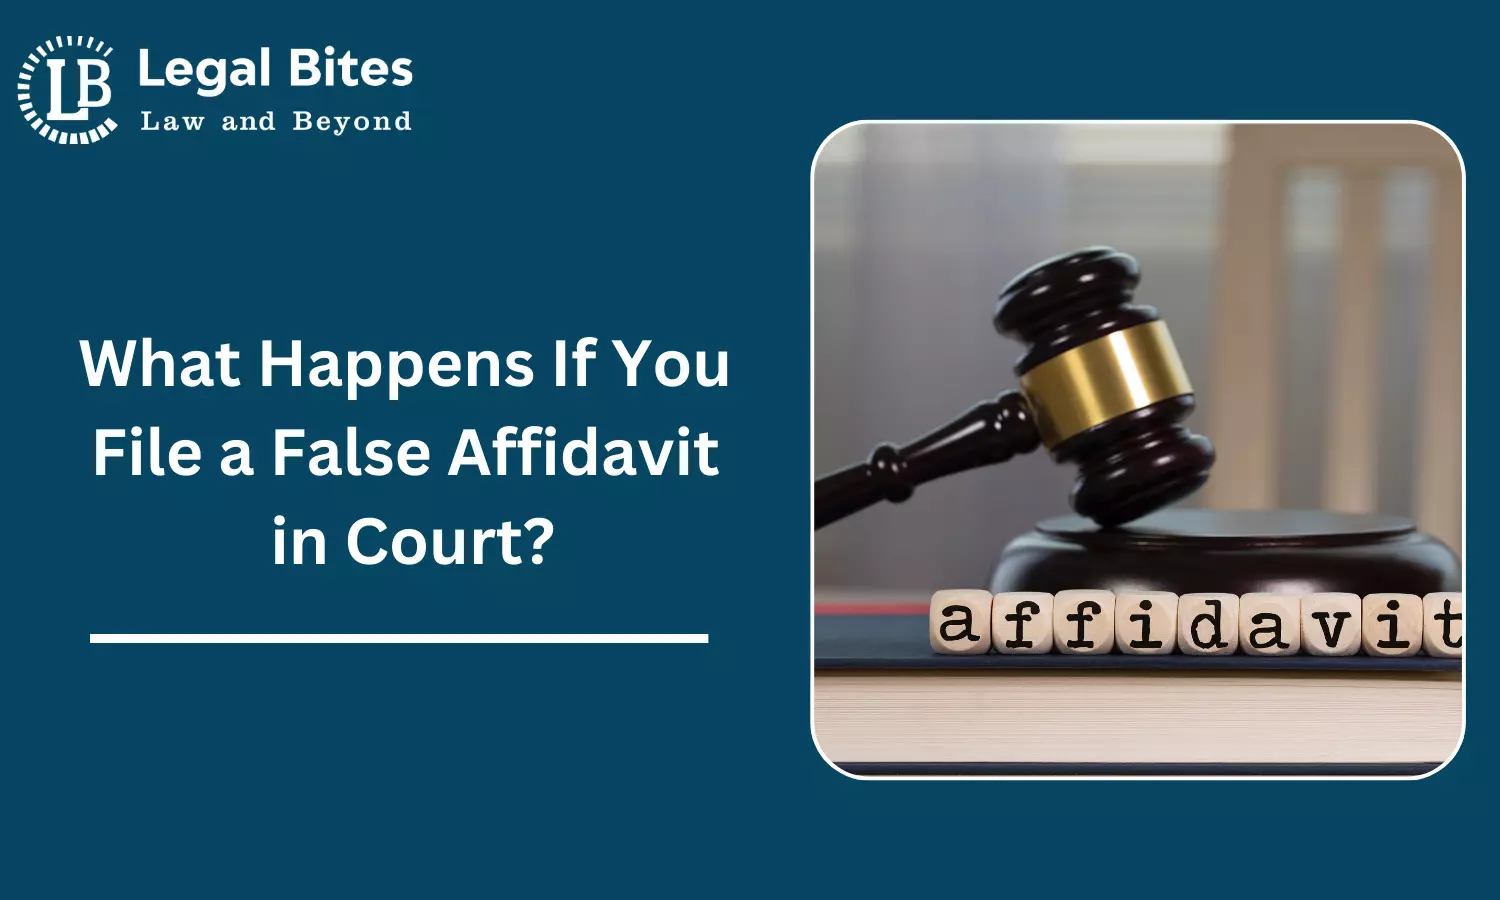 What Happens If You File a False Affidavit in Court?